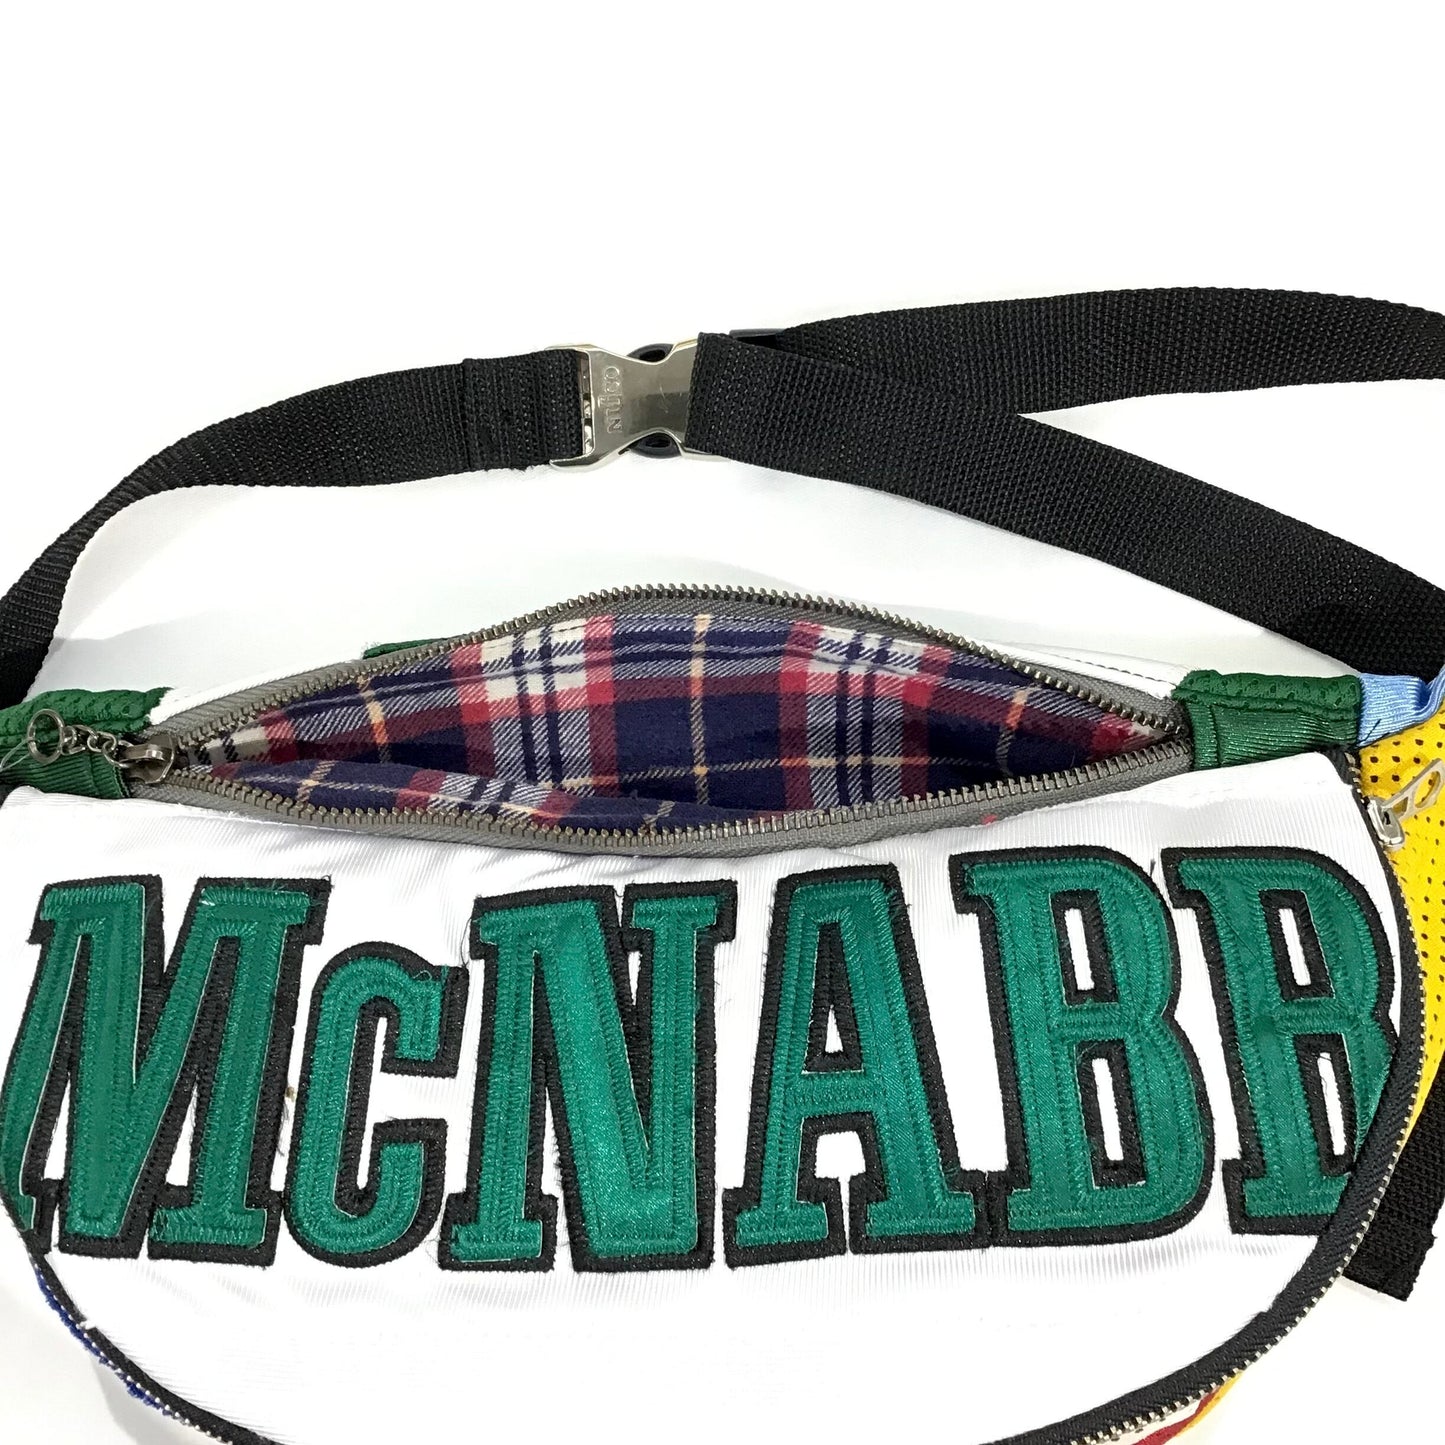 NFL Team Eagles "MCNABB" Amekaji Japanese Vintage Handmade Custom One and Only One Cote Mer Upcycle Sustainable Upscale Street Fashion Embroidered Remake Deconstructed Shirts Waist Bag